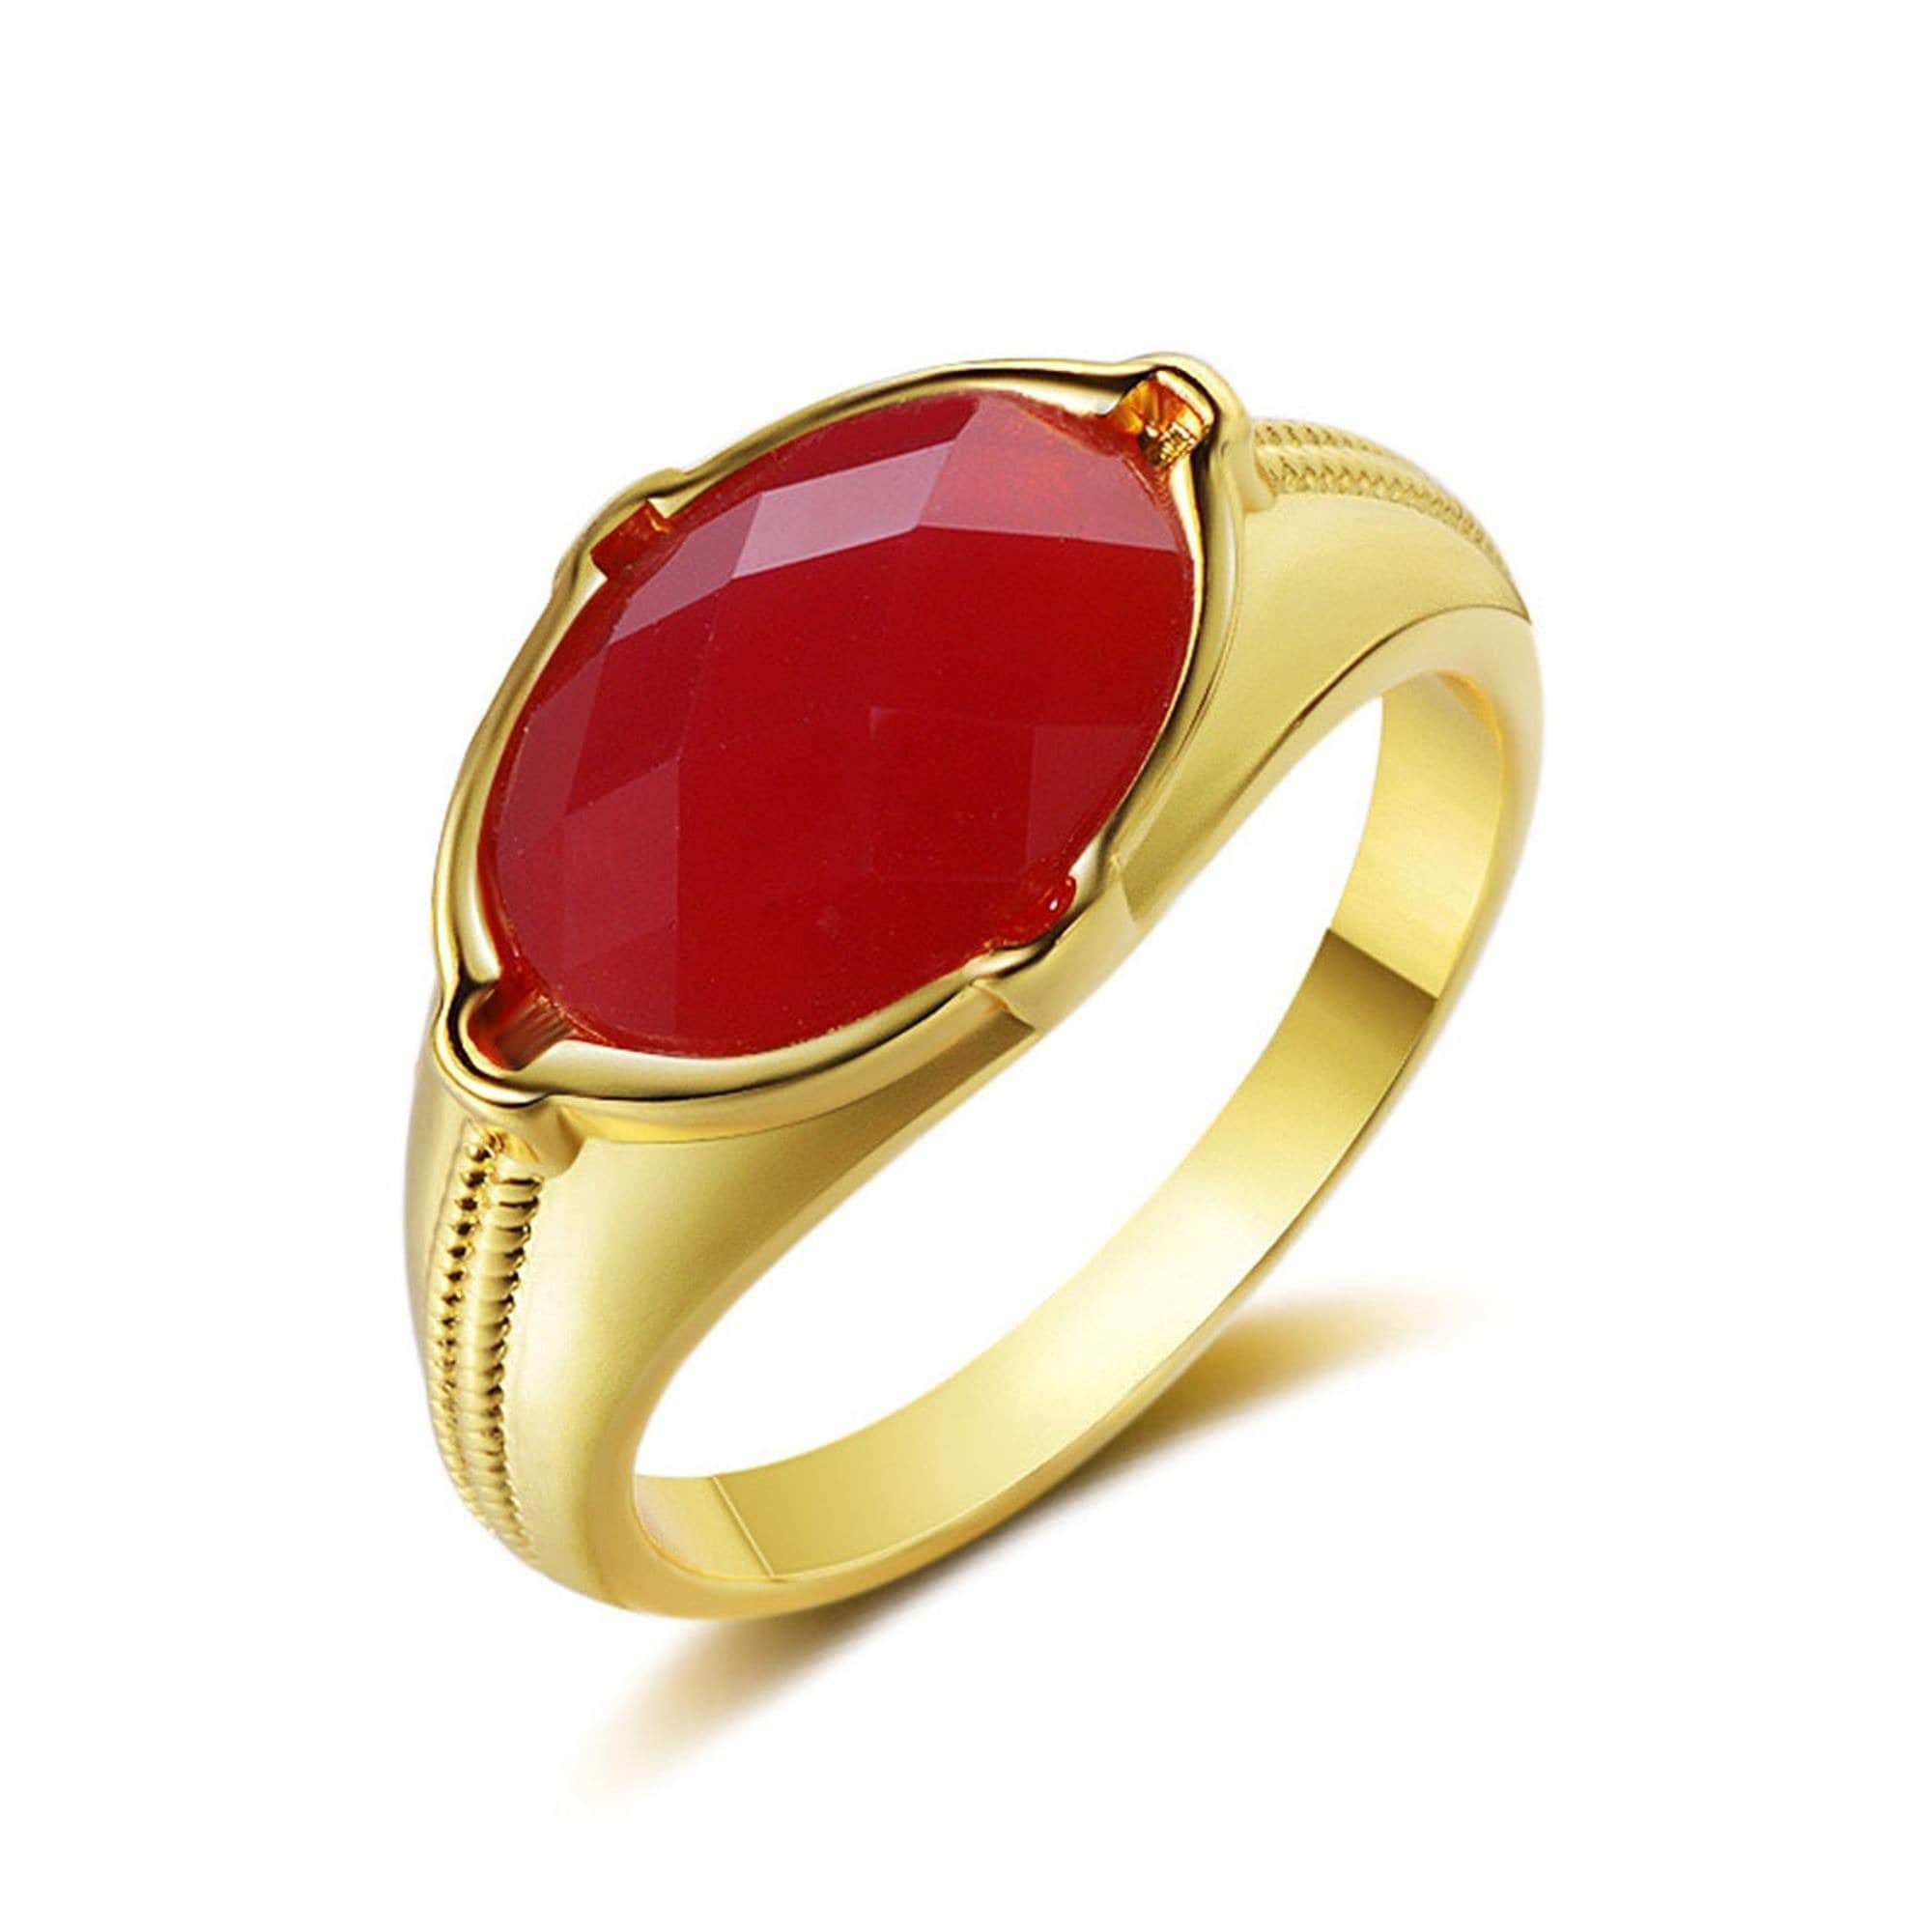 Panchaloha/Impon red coral/Pavazham stone ring for Men and Women Alloy  Coral Ring